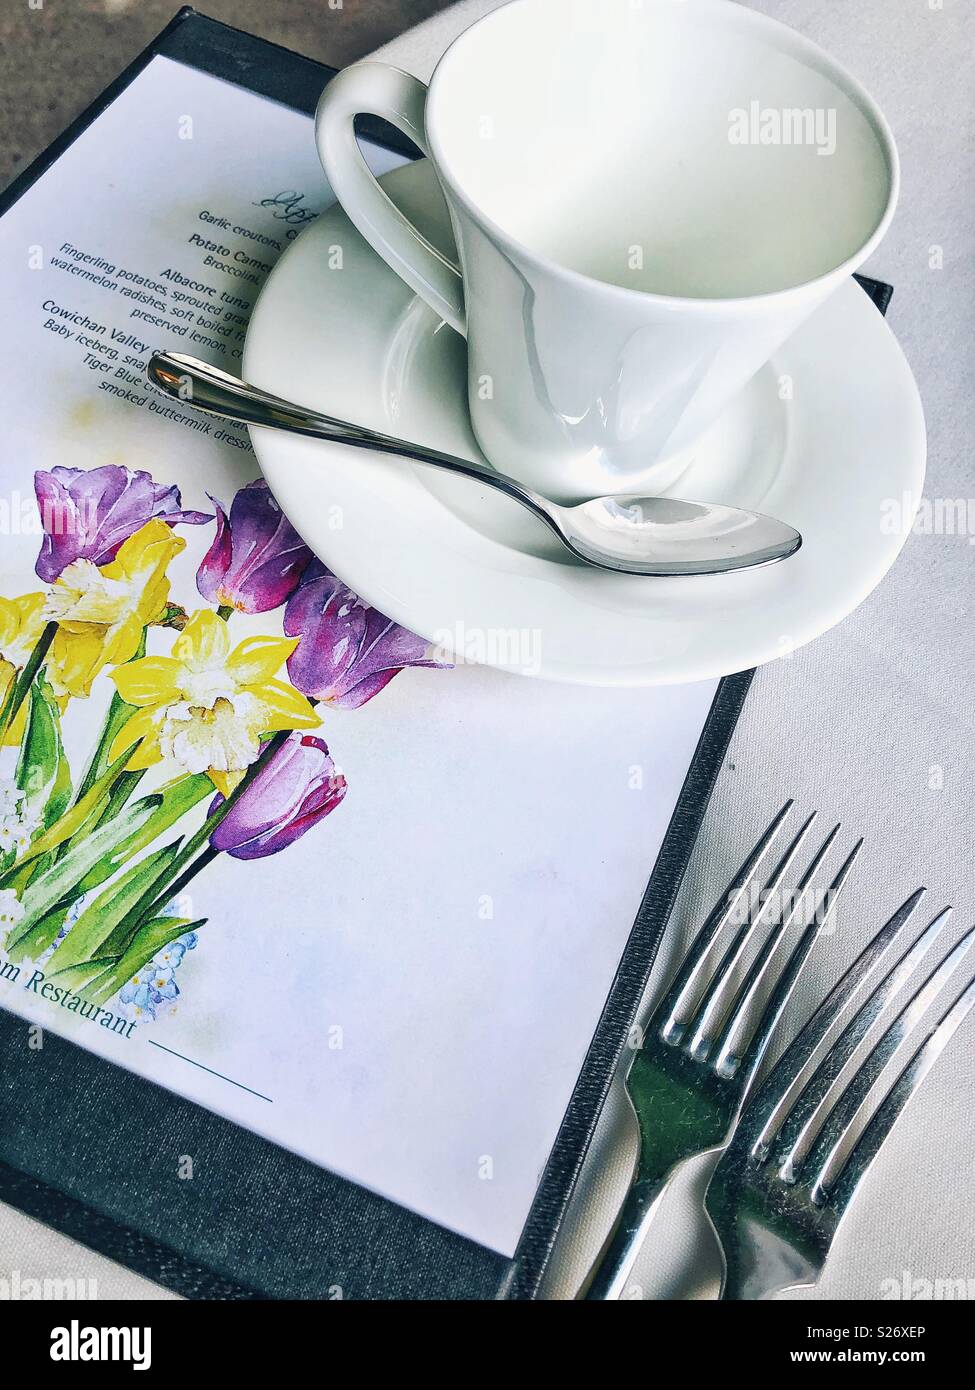 Menu and teacup on a table Stock Photo